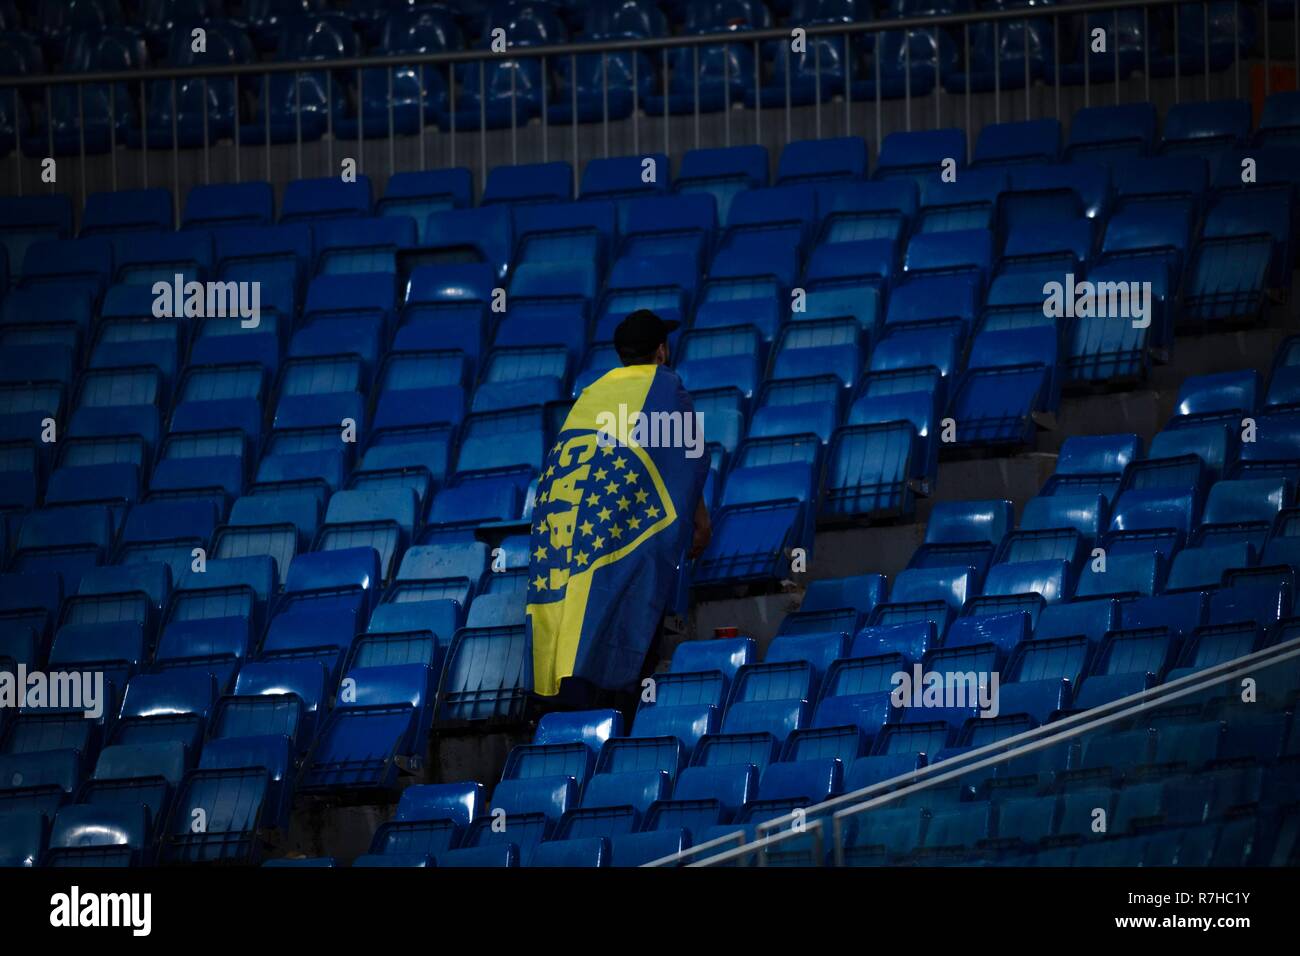 Boca Juniors fans leave the Santiago Bernabeu at the end of the Copa Libertadores final 2018/19 match between Boca Juniors and River Plate, at Santiago Bernabeu Stadium in Madrid on December 9, 2018. (Photo by Guille Martinez/Cordon Press)  Cordon Press Stock Photo